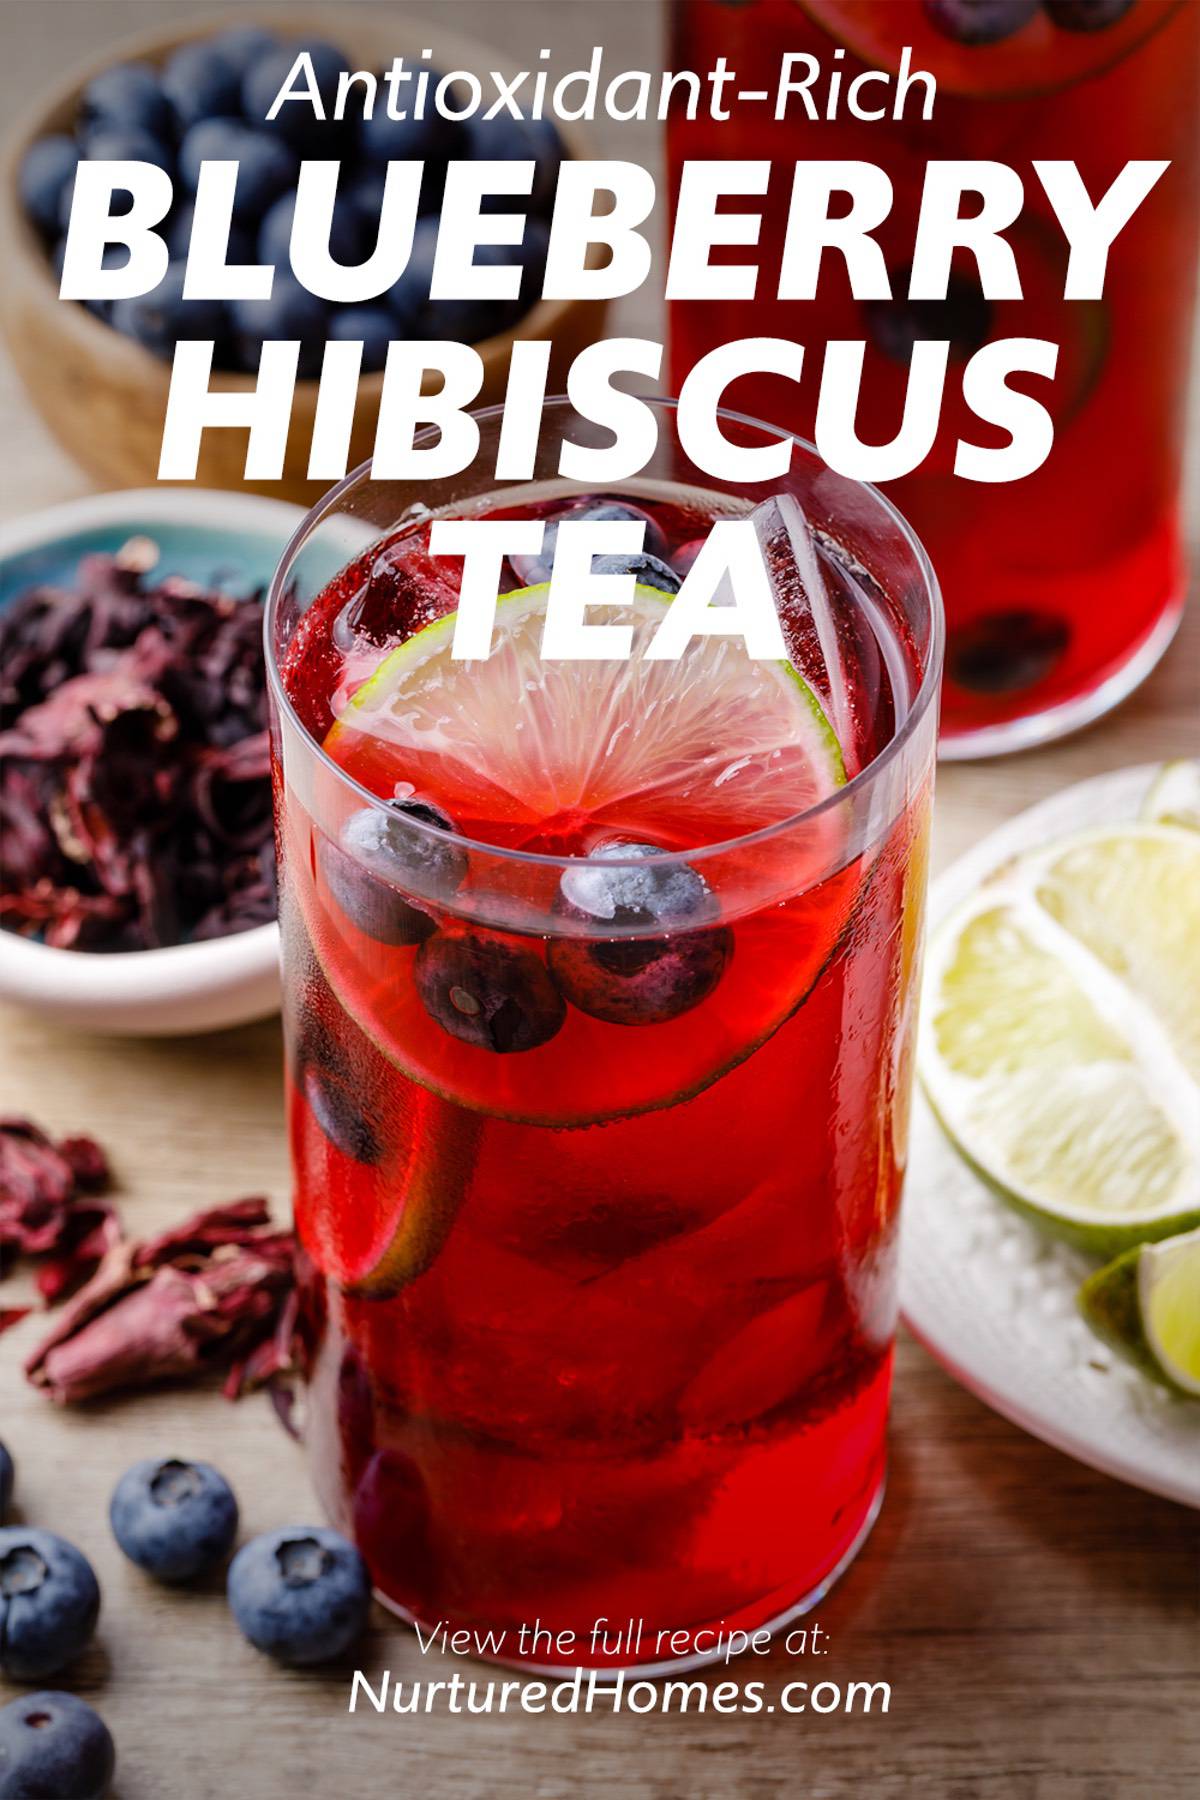 How to Make Antioxidant-Rich Blueberry Hibiscus Tea